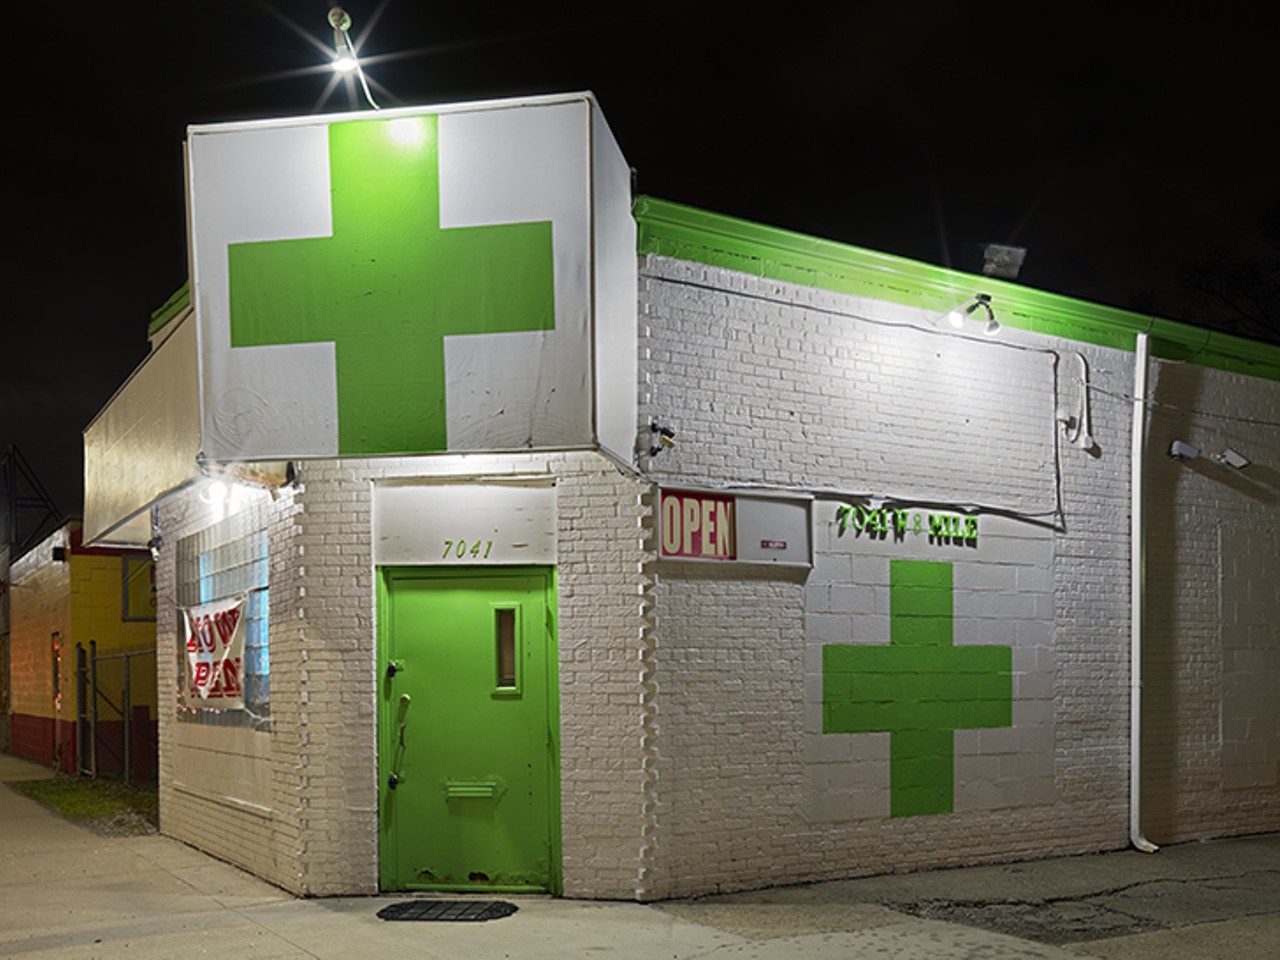 Photos show the early days of Detroit's medical marijuana industry &#151; before the crackdown